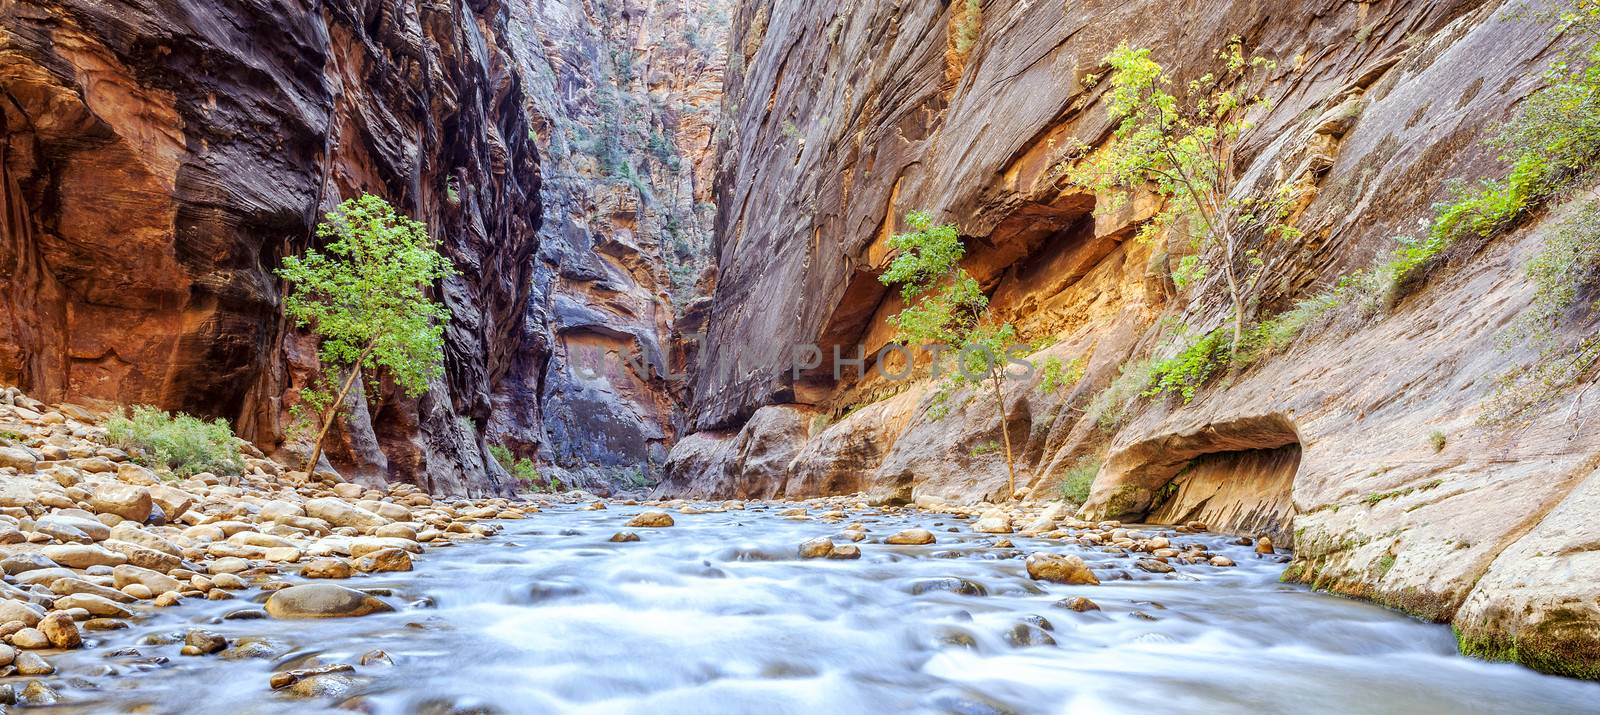 The iconic bend of the Virgin River in Zion National Park